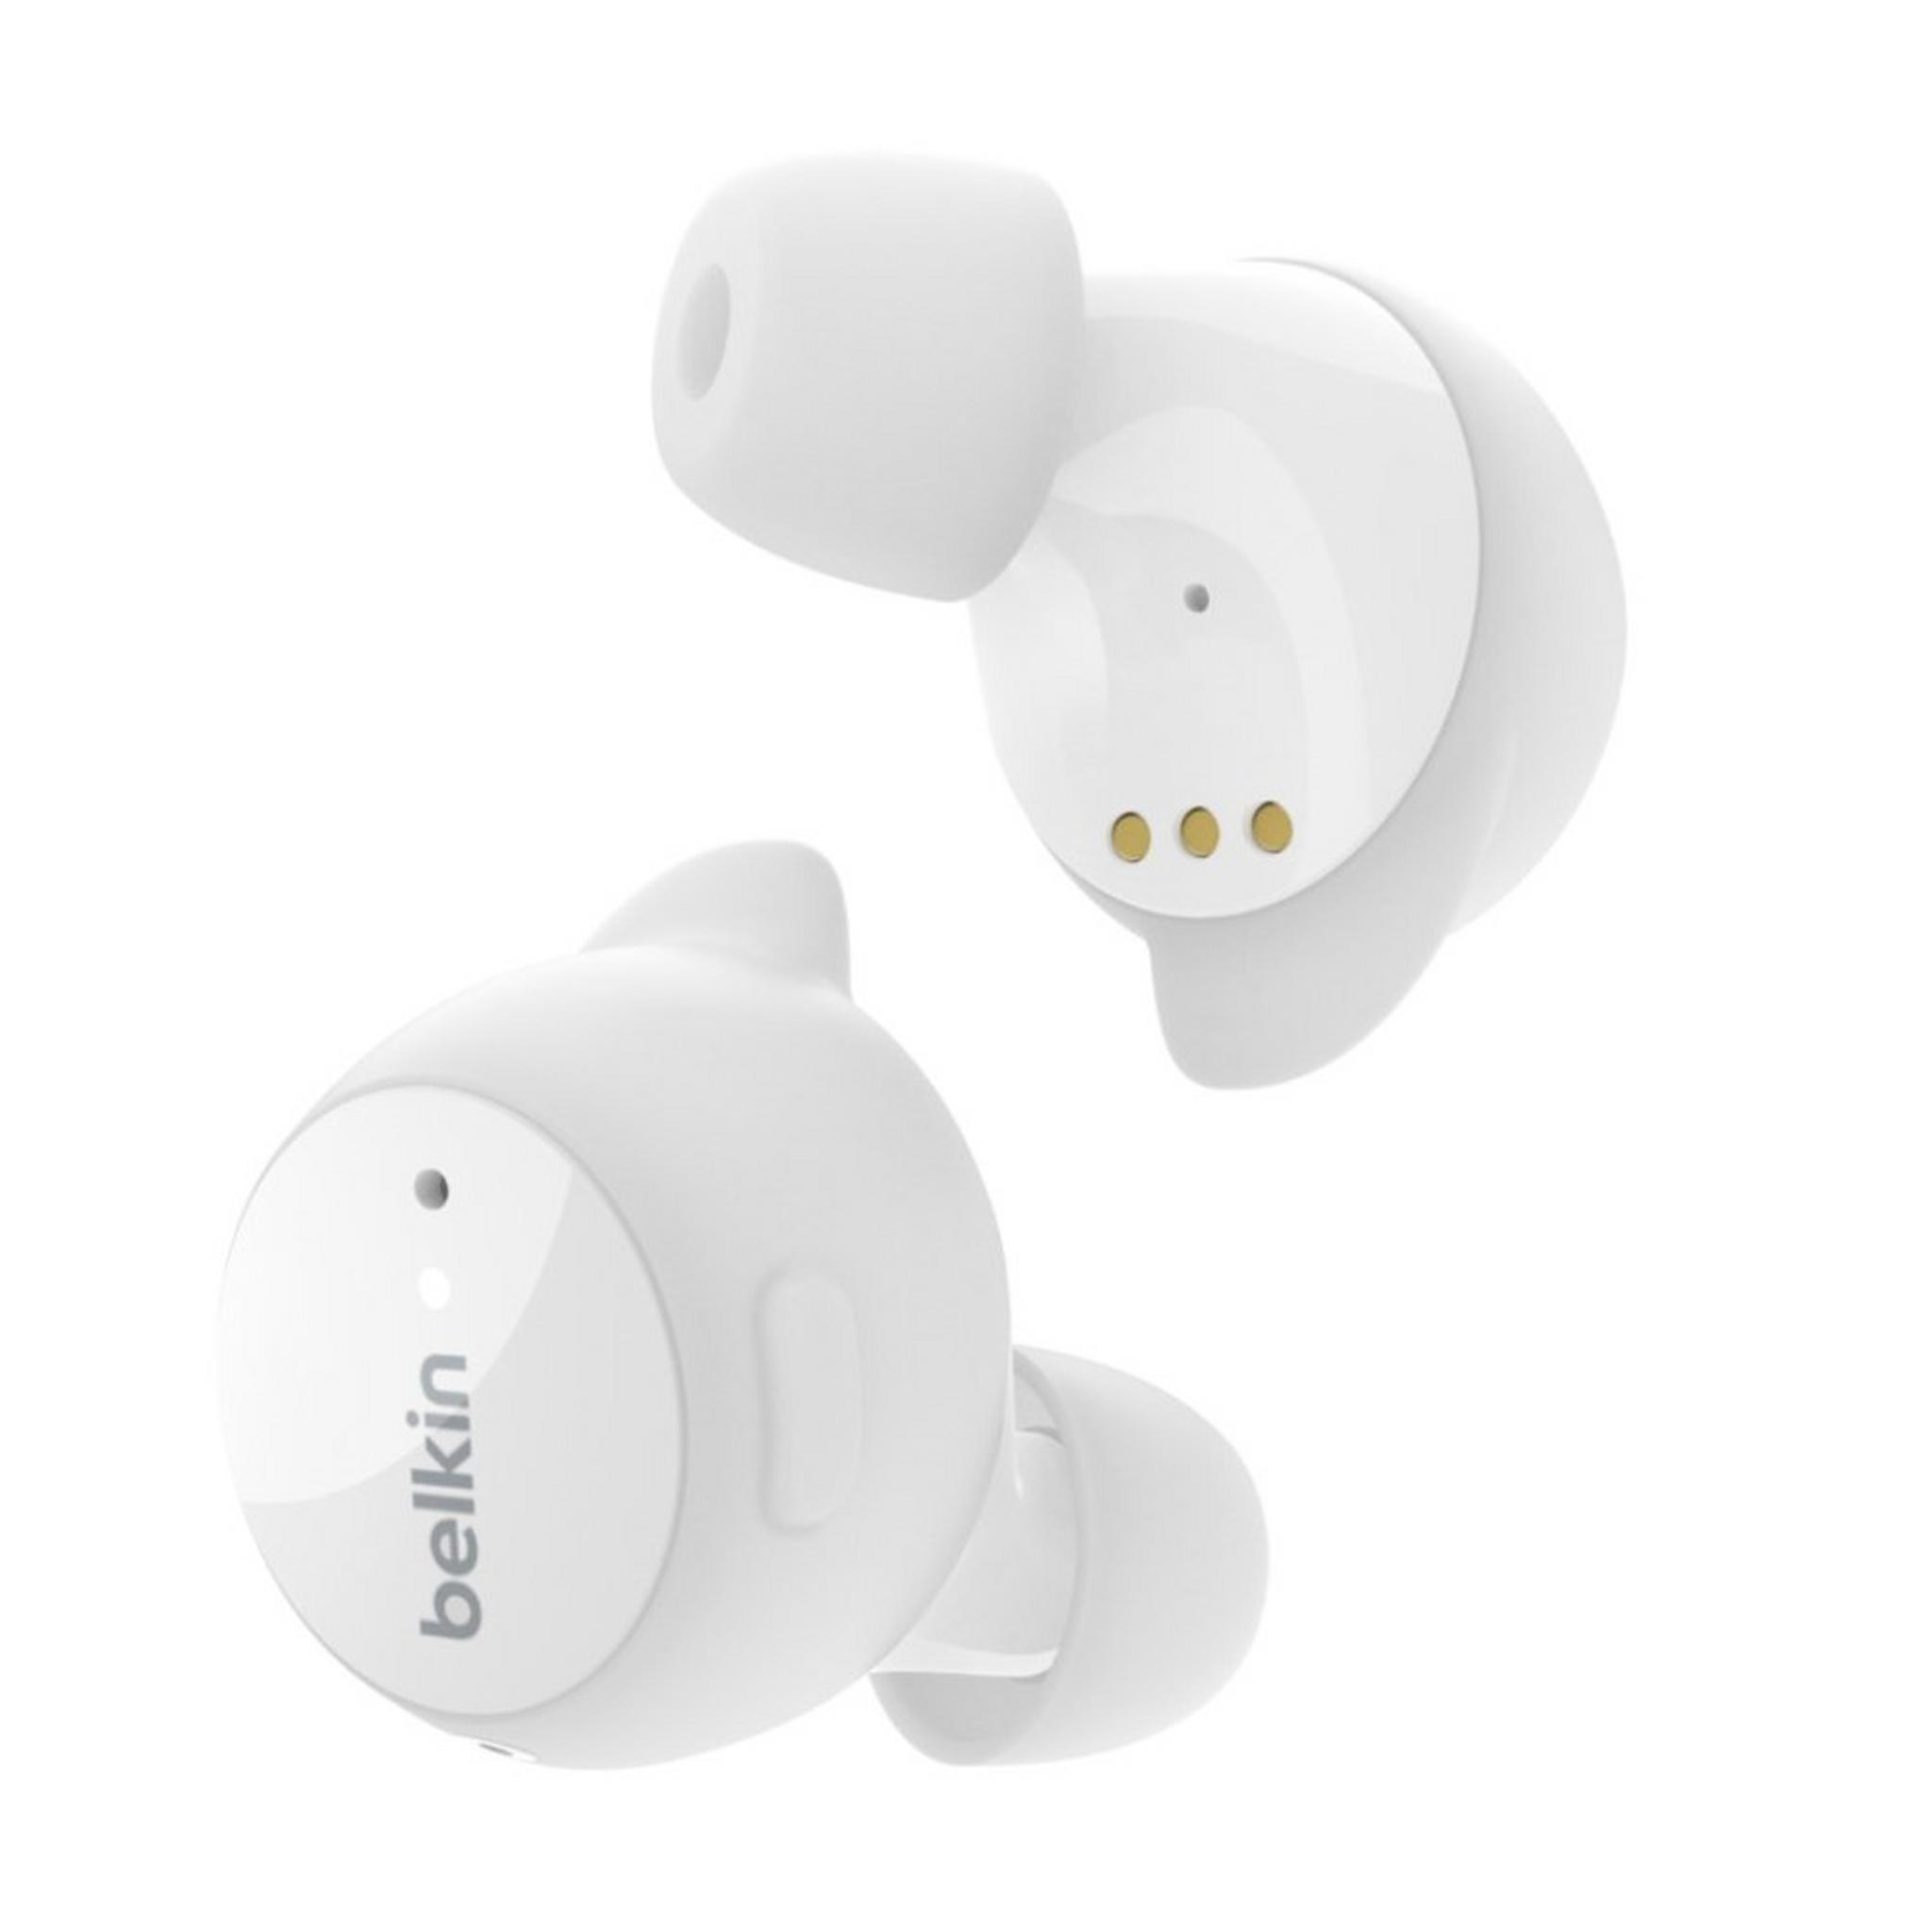 Belkin SoundForm Immerse Noise Cancelling Earbuds - White